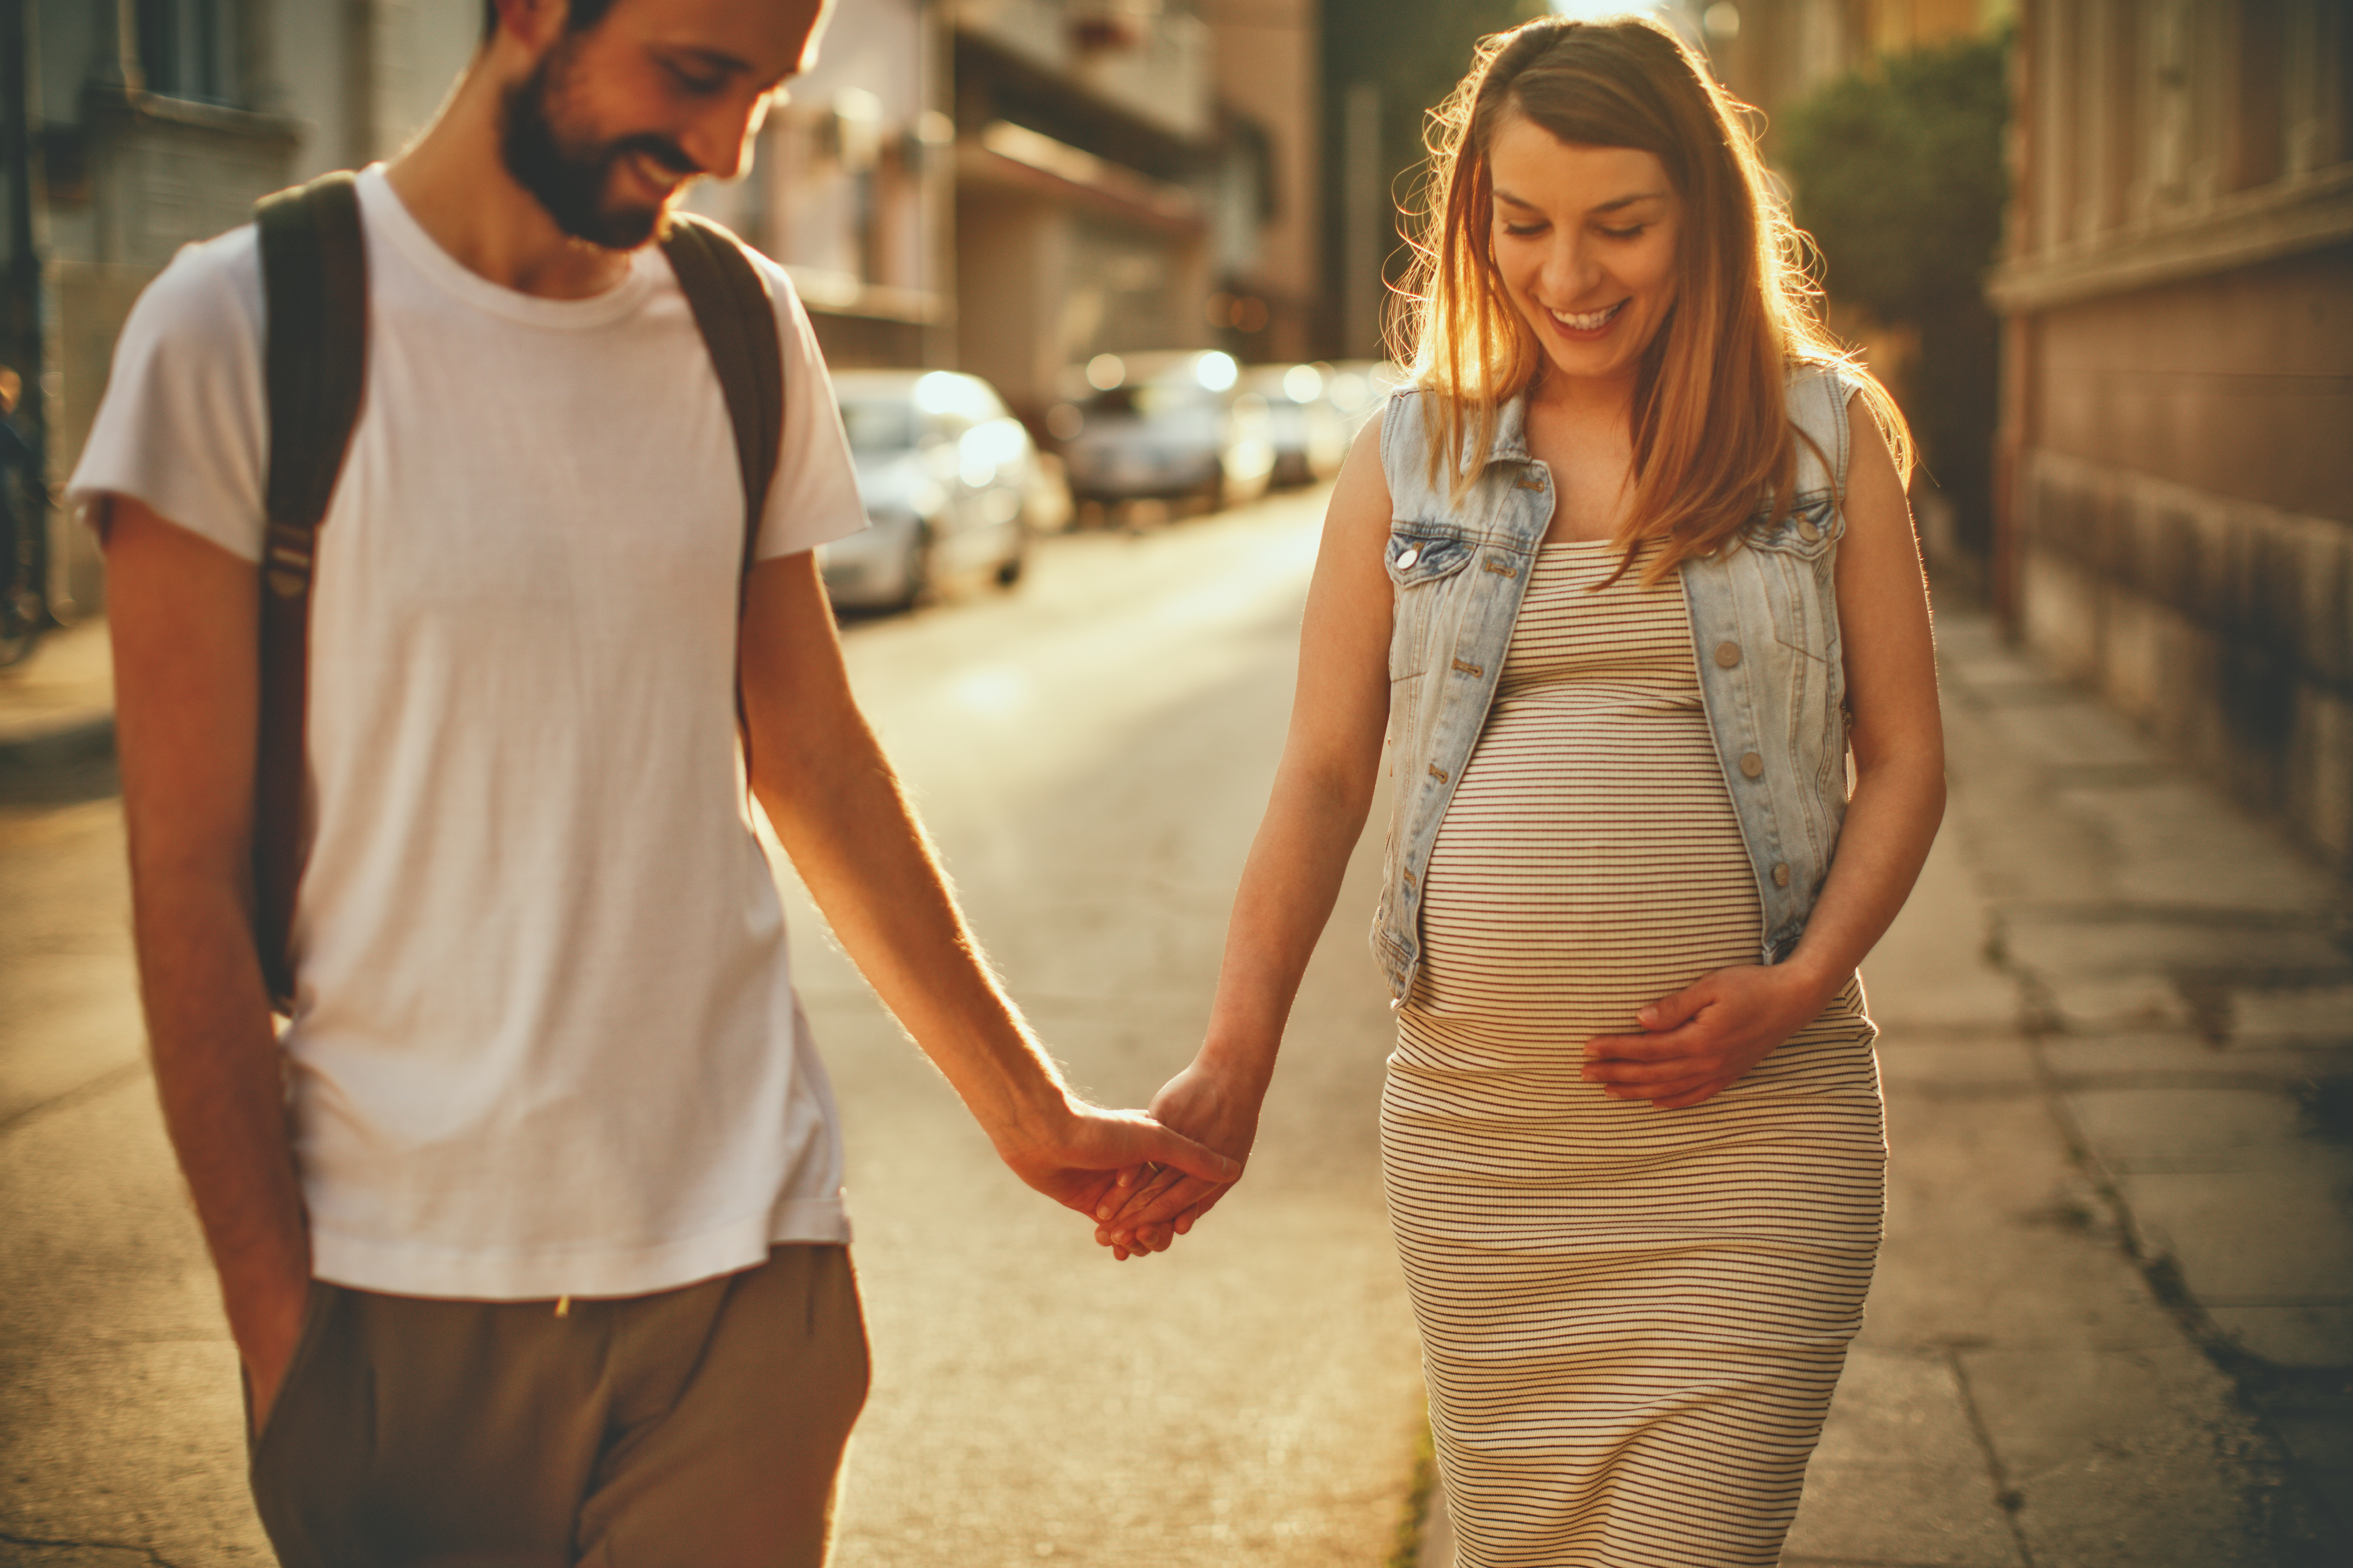 At first glance, it may not seem like oral health has much to do with pregnancy, but it’s actually a critical part of it. A mother’s oral health can be correlated with the baby’s overall health, so it’s important to pay close attention to your dental care and any changes that may arise while you’re pregnant.